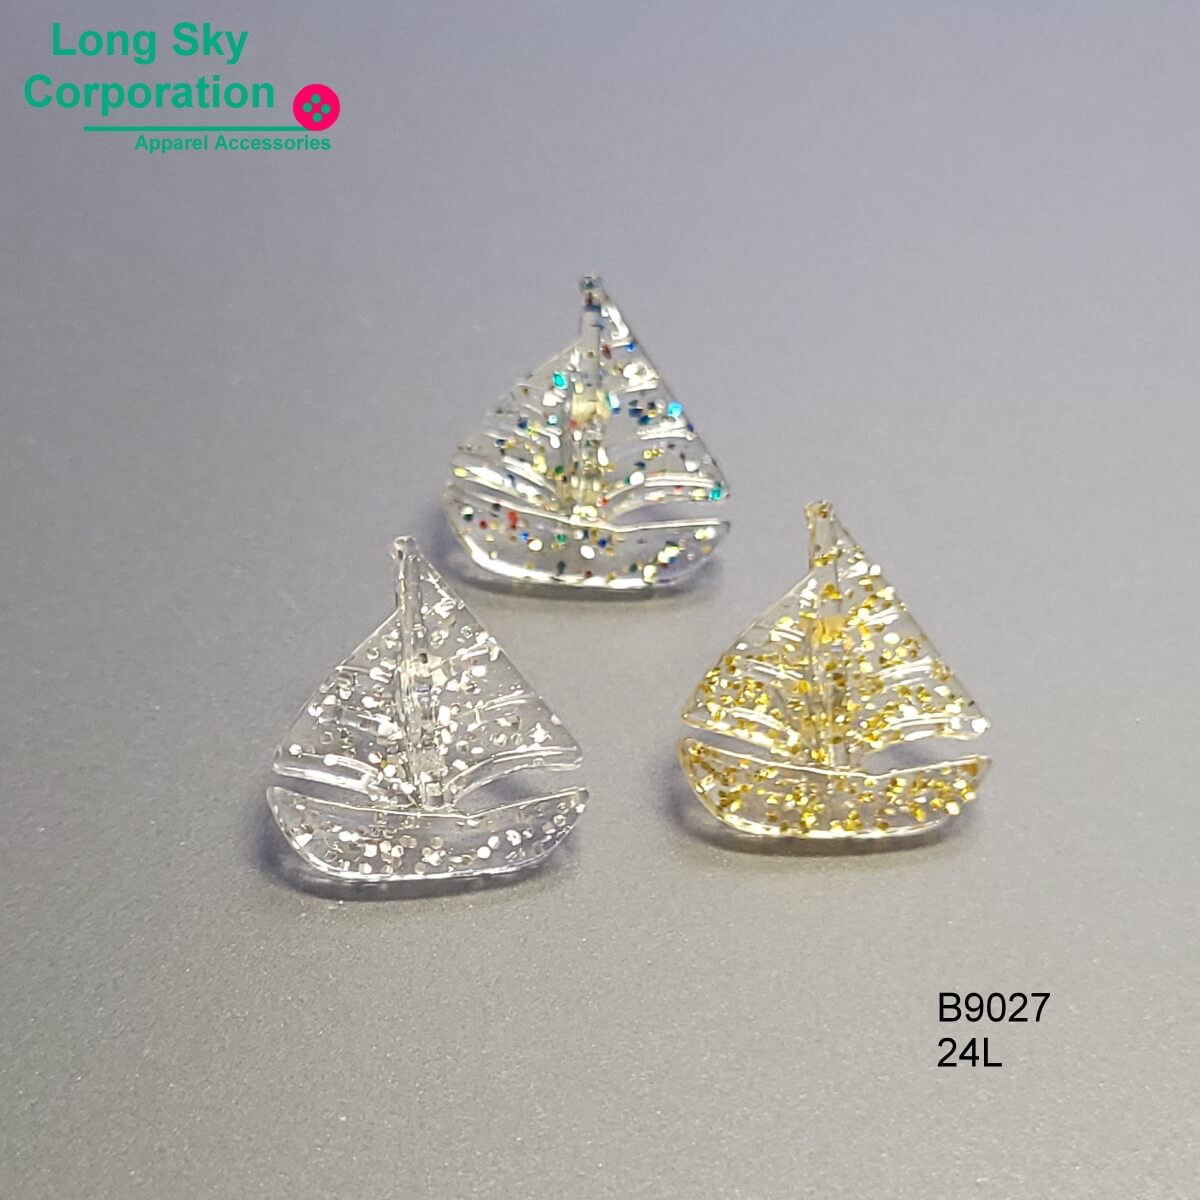 Sailboat shape cute glitter button for craft and kids clothing (B9027/24L)